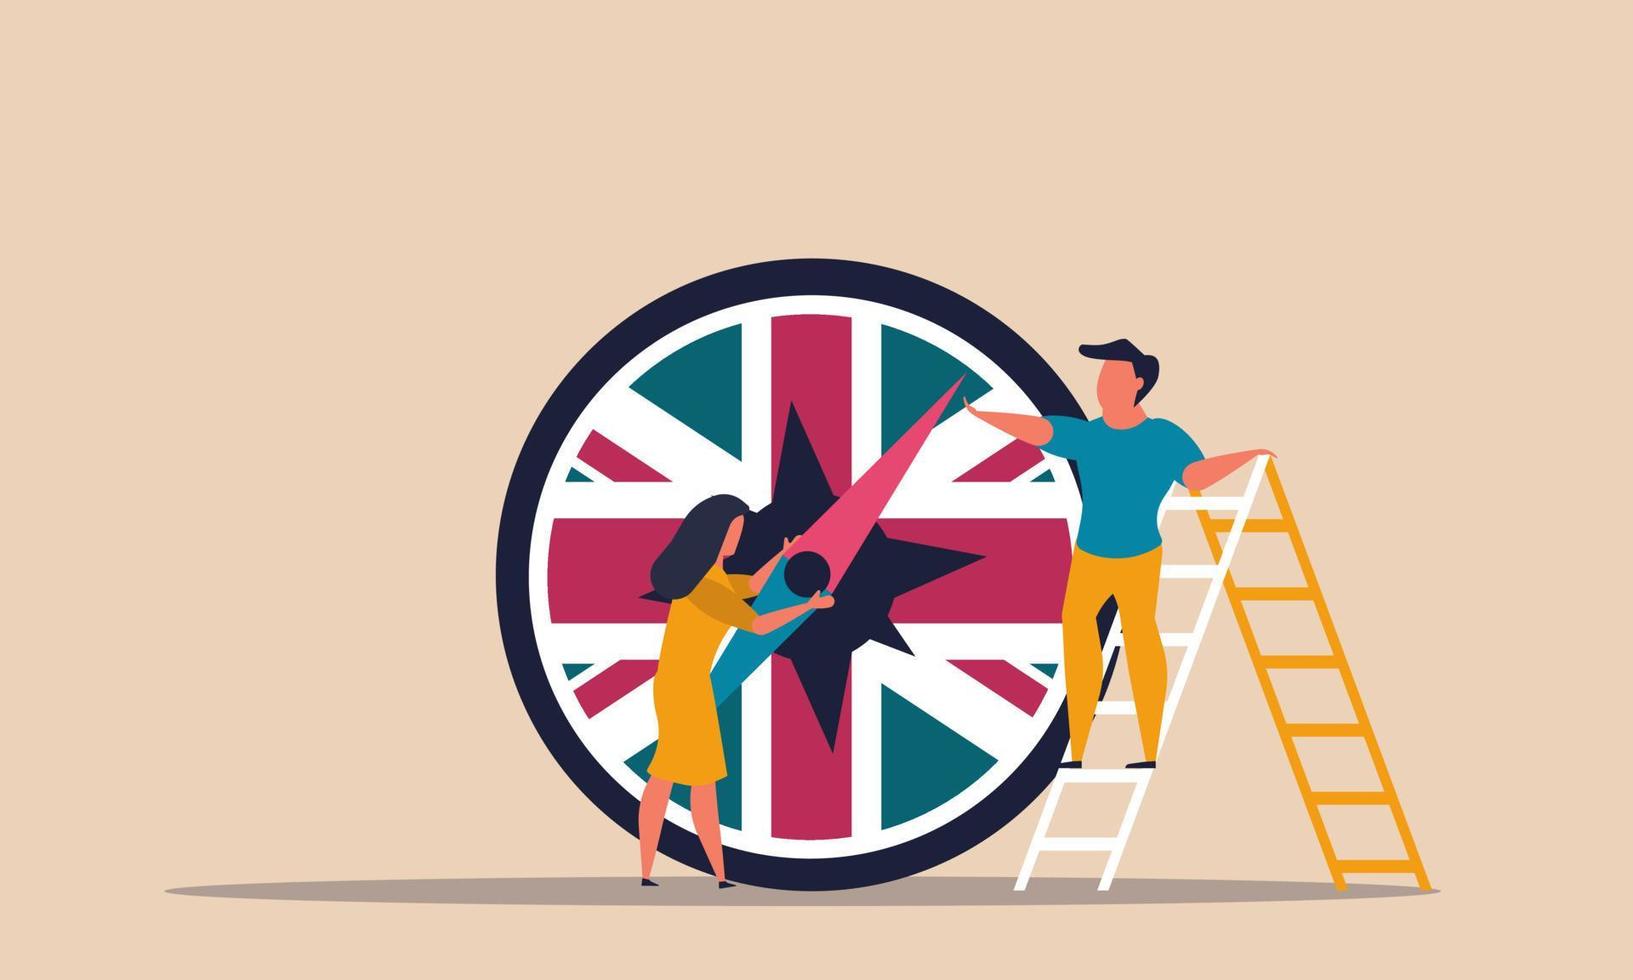 Uk finance growth and parliament strategy politics to europe. Government compass direction vector illustration concept. Market economic and invest to trade. Business arrow benefit and country deal